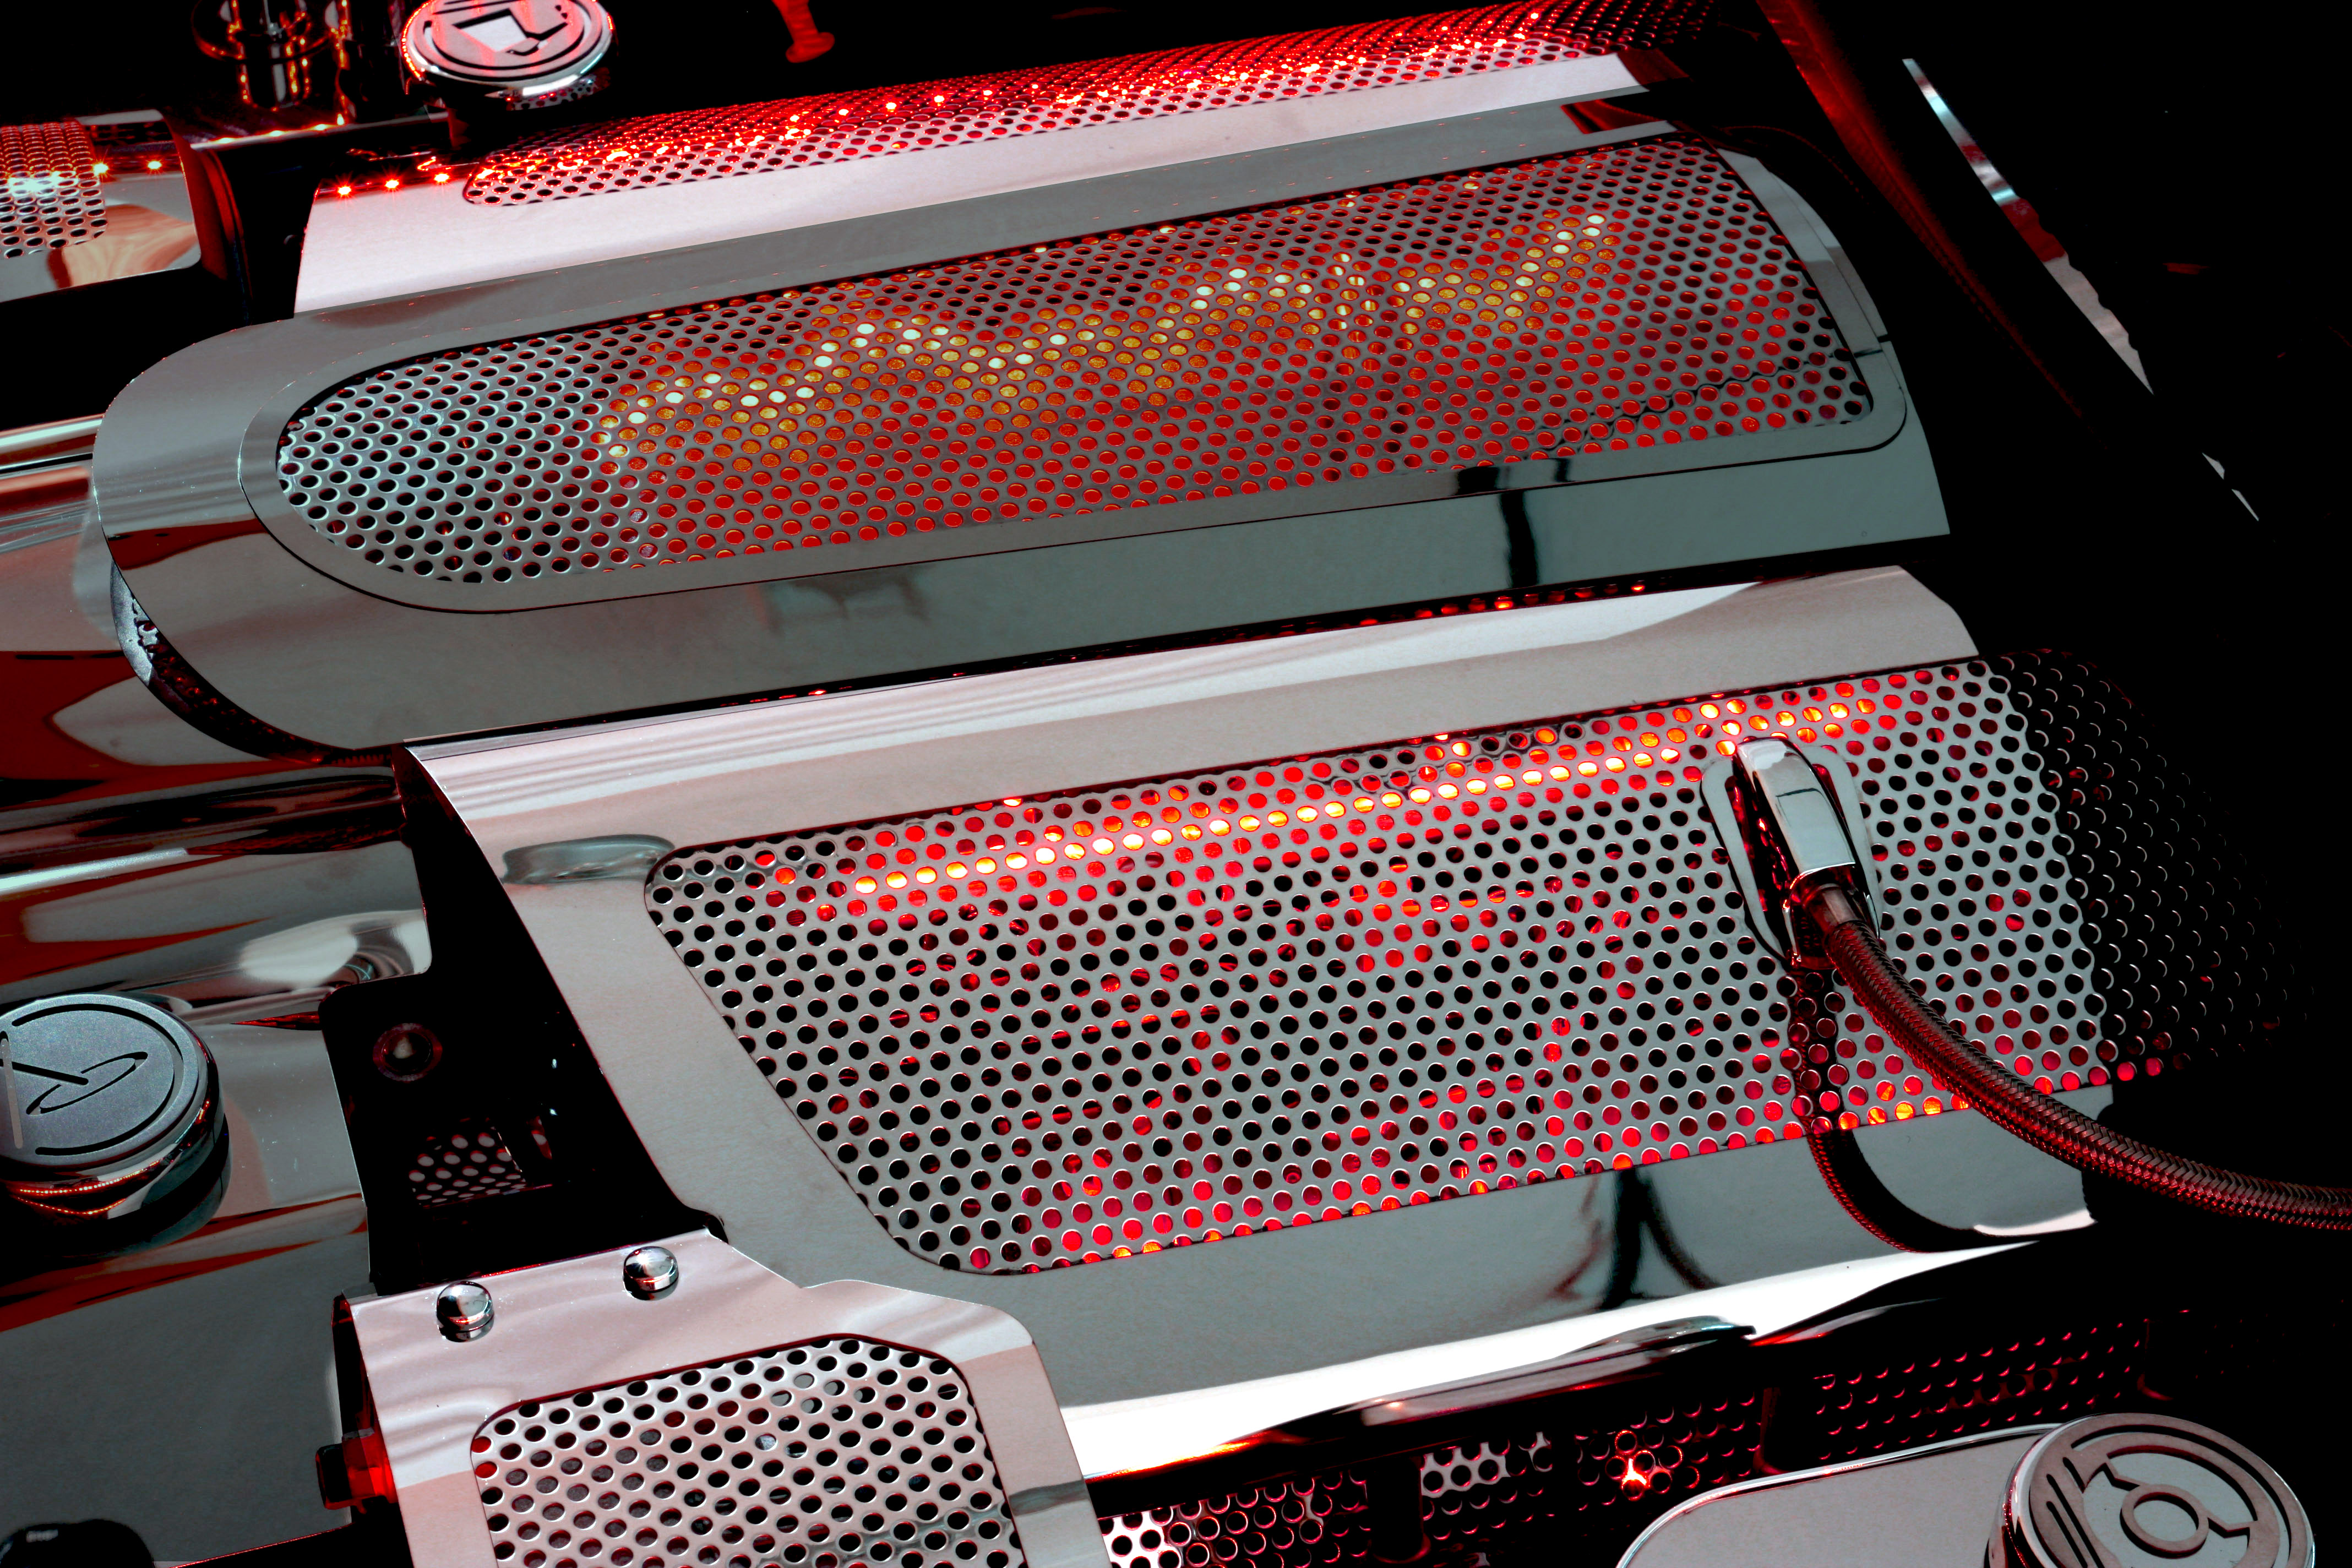 2008-2013 C6 Corvette, LS3, Fuel Rail Covers Perforated Replacement w/cap C6 08-13 Illum. Red LED, Stainless Steel